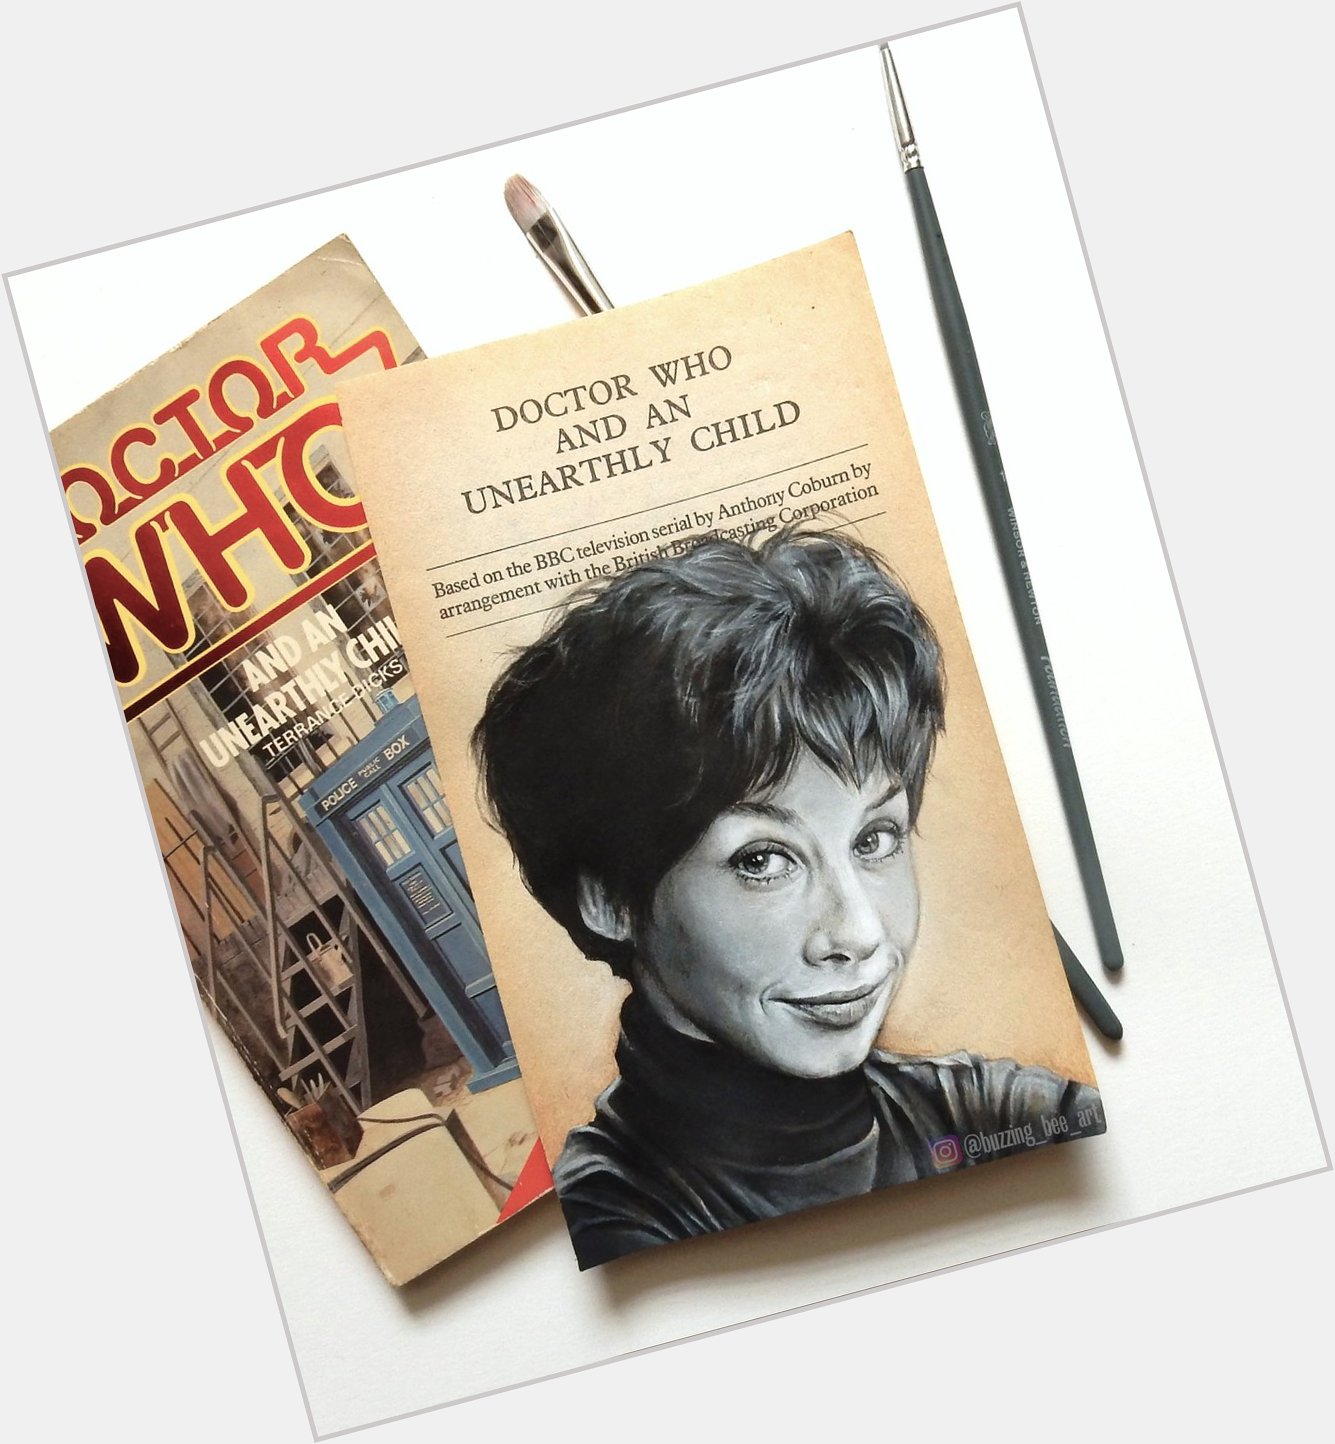 Happy Birthday to the lovely Carole Ann Ford!  